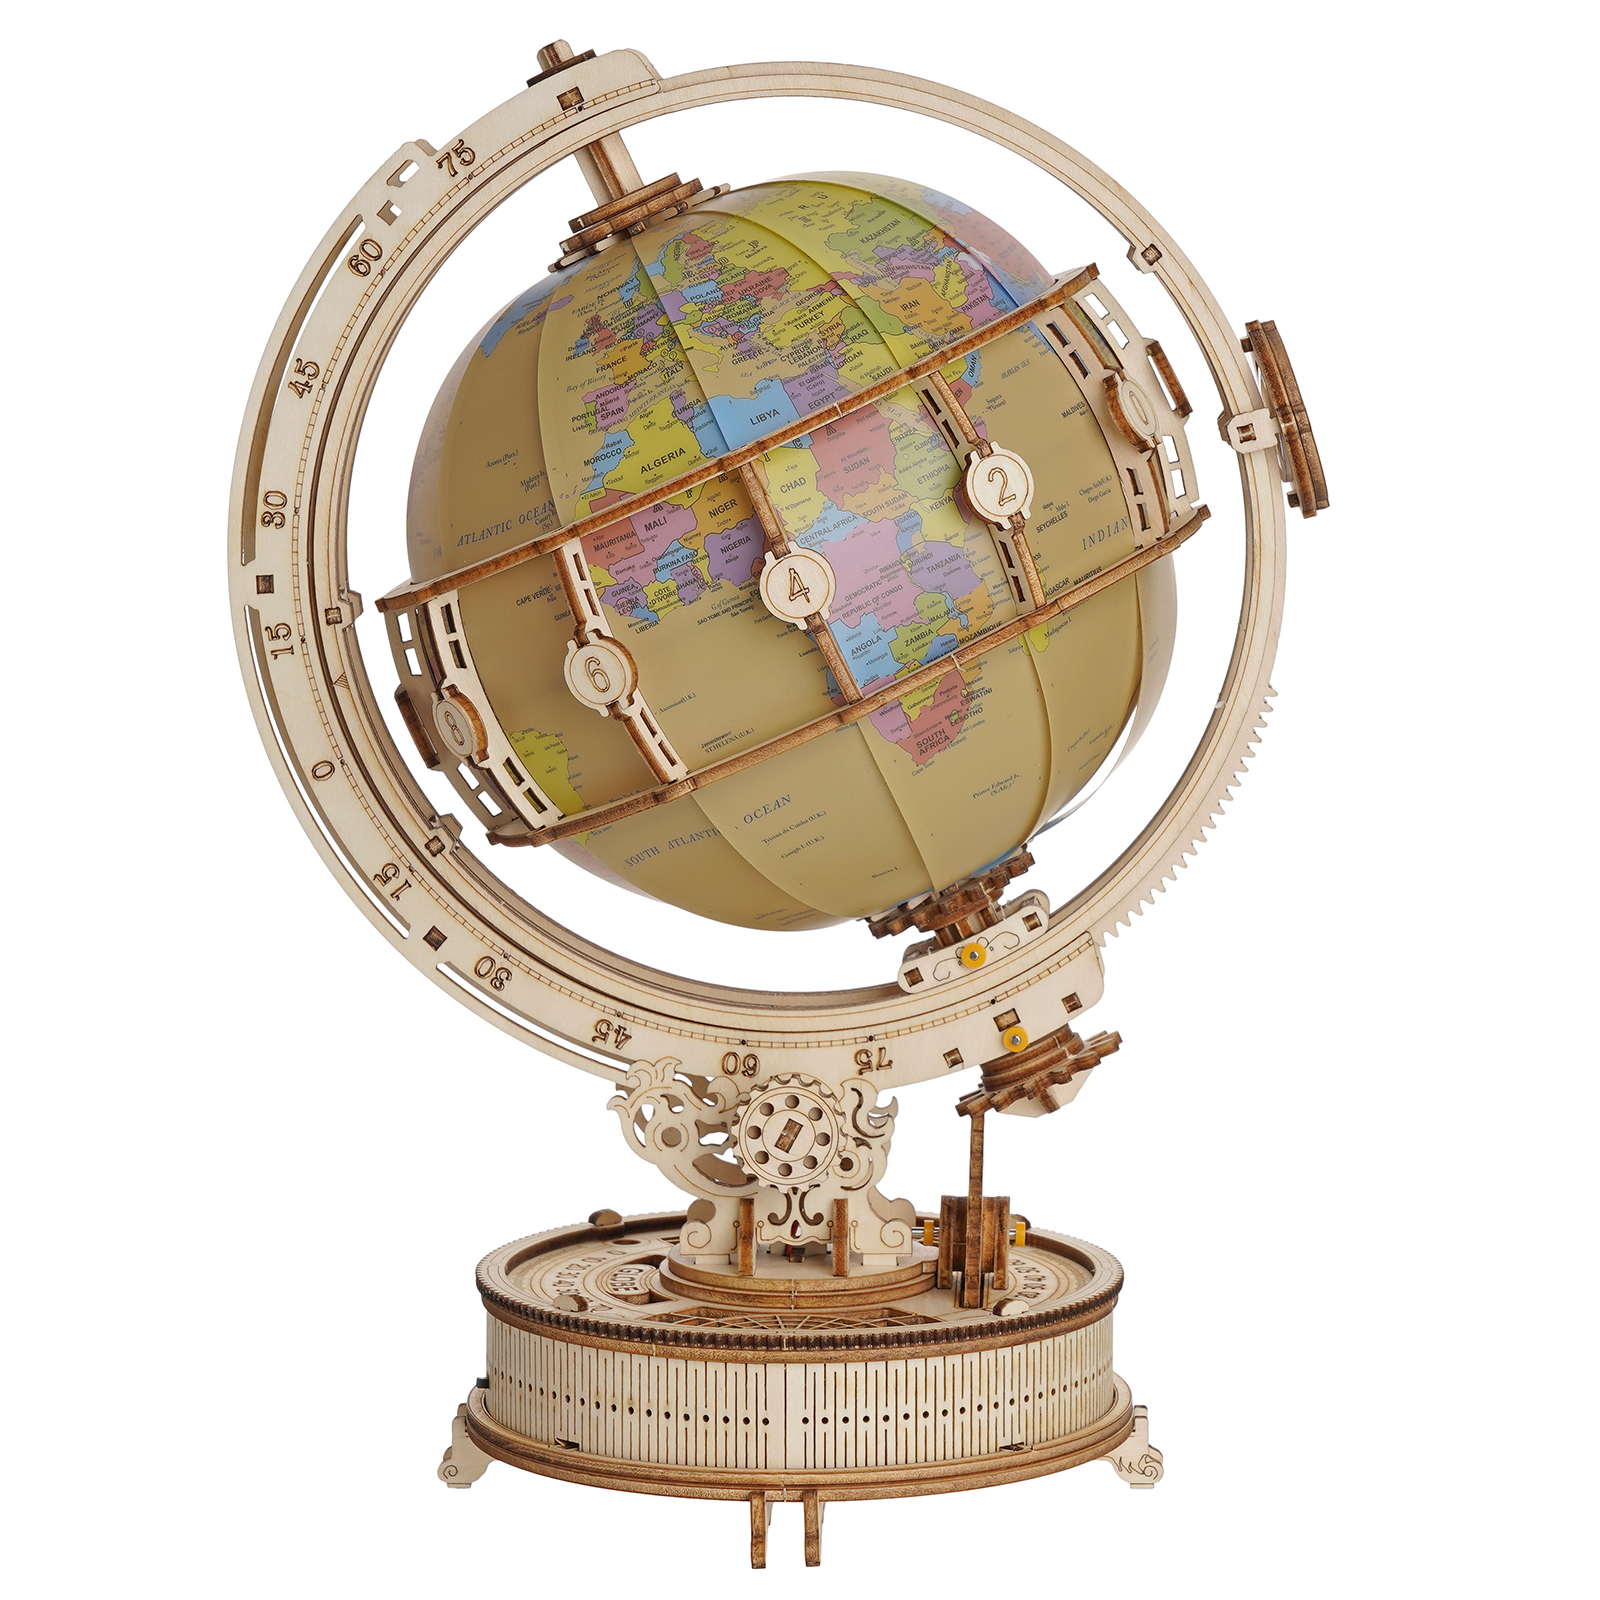 BSHAPPLUS 3D Wooden Puzzles for Adults LED Light Wooden Globe with Stand Puzzle Model Building Kits